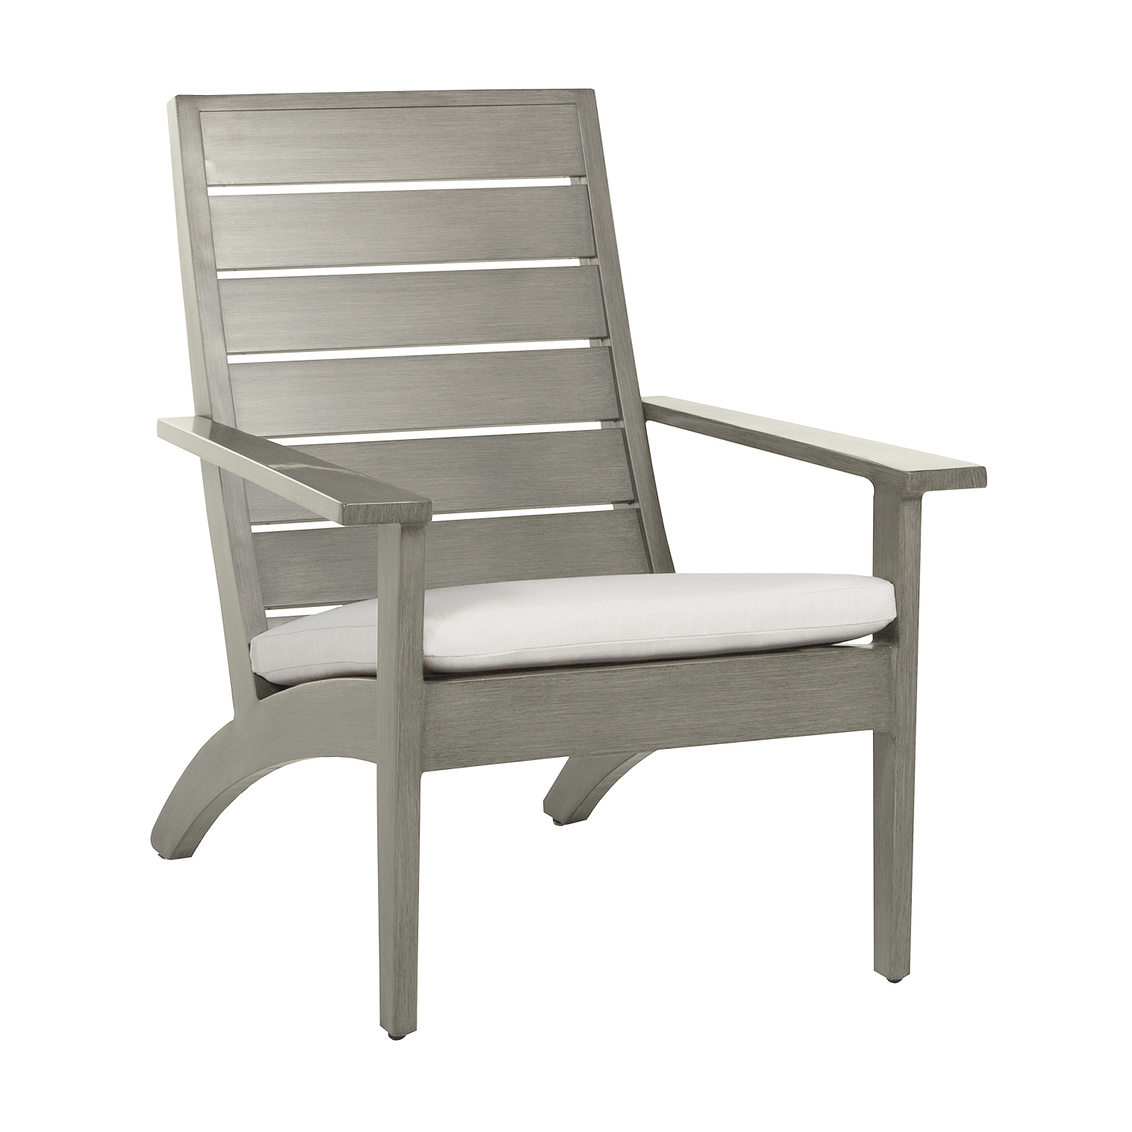 kennebunkport adirondack chair in oyster – frame only product image